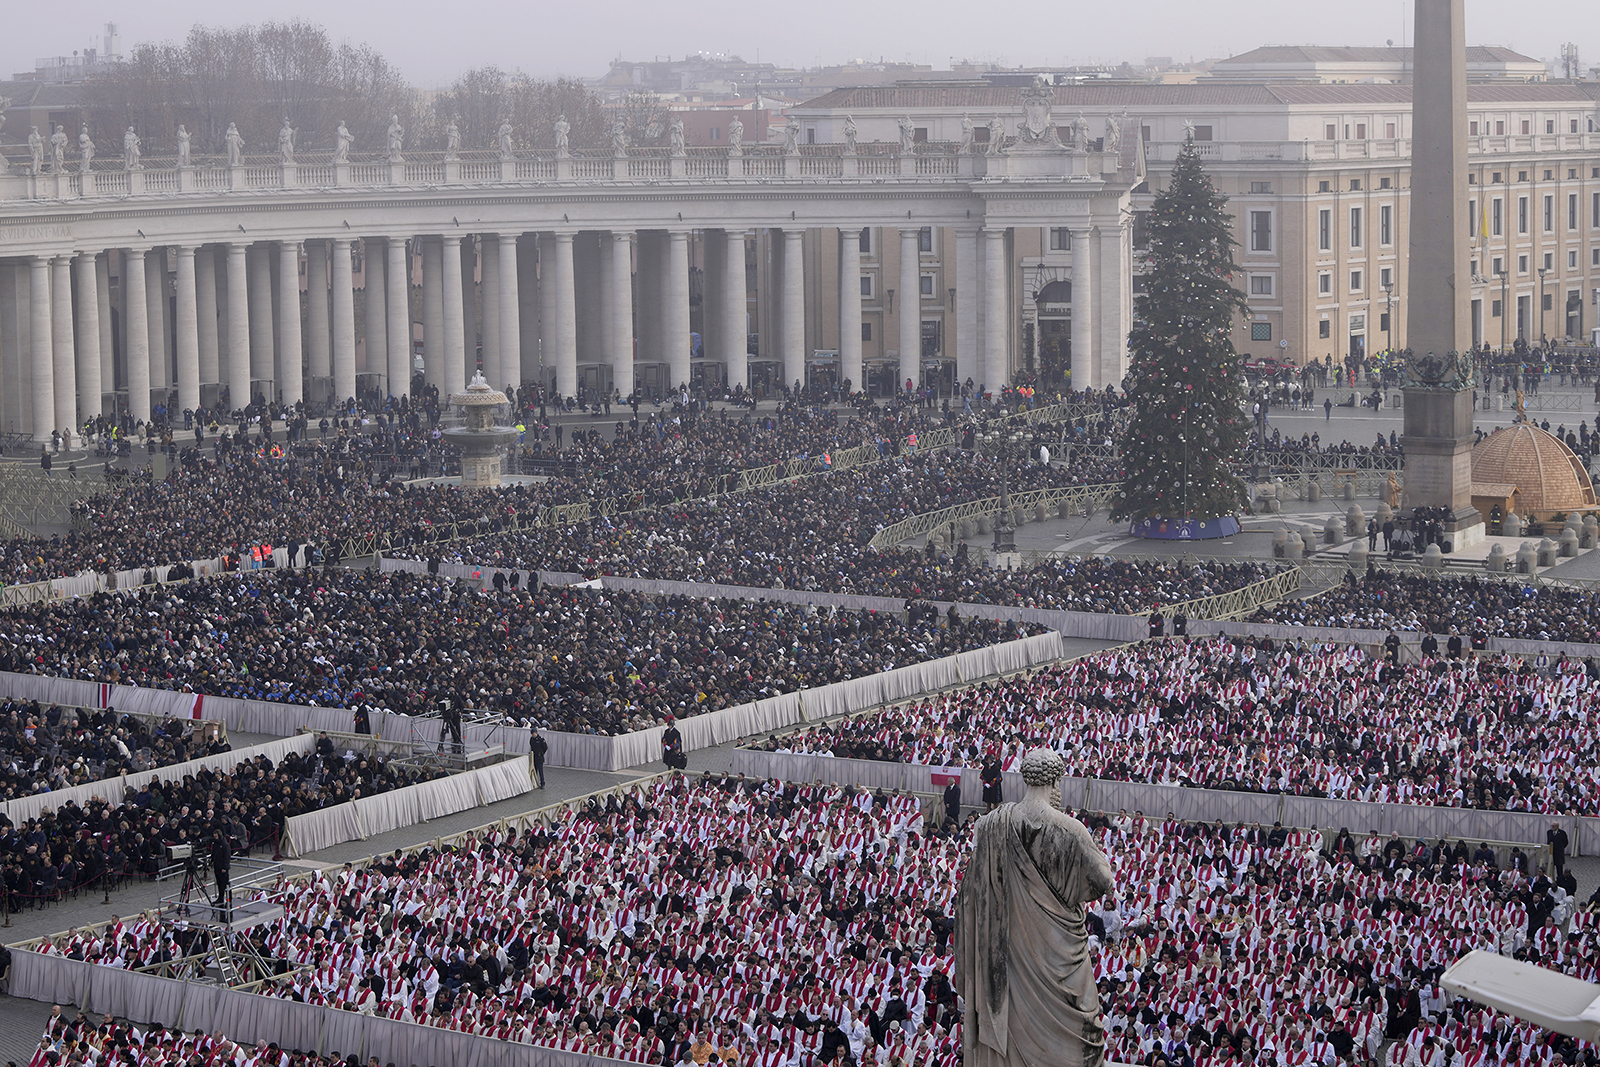 Faithful attend the funeral mass for Emeritus Pope Benedict XVI in St. Peter's Square at the Vatican, Thursday, Jan. 5, 2023. (AP Photo/Ben Curtis)